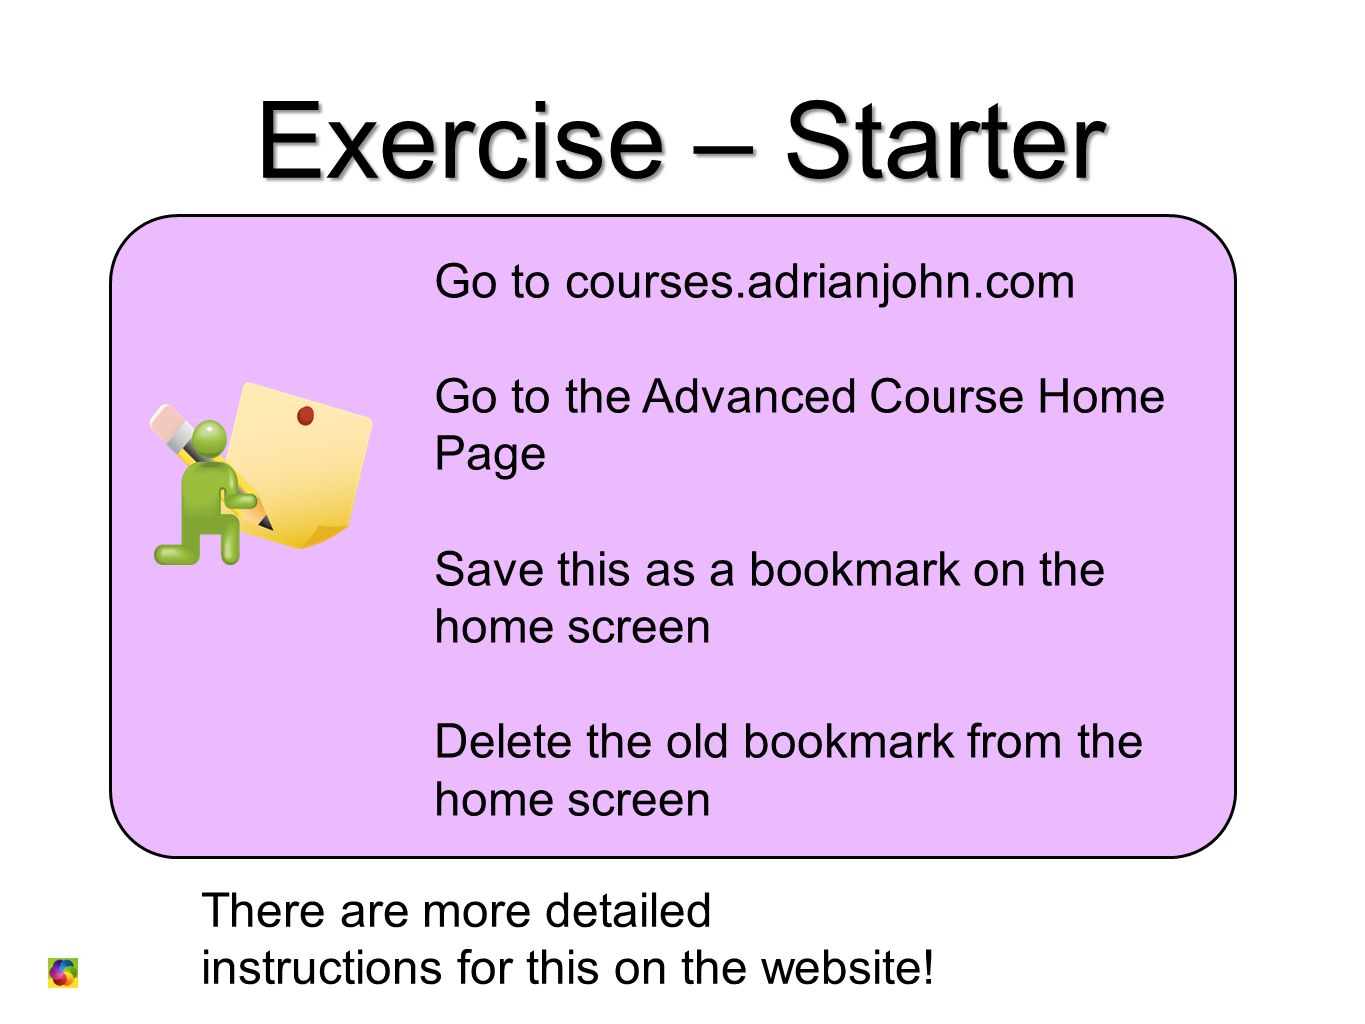 Exercise – Starter Go to courses.adrianjohn.com Go to the Advanced Course Home Page Save this as a bookmark on the home screen Delete the old bookmark from the home screen There are more detailed instructions for this on the website!